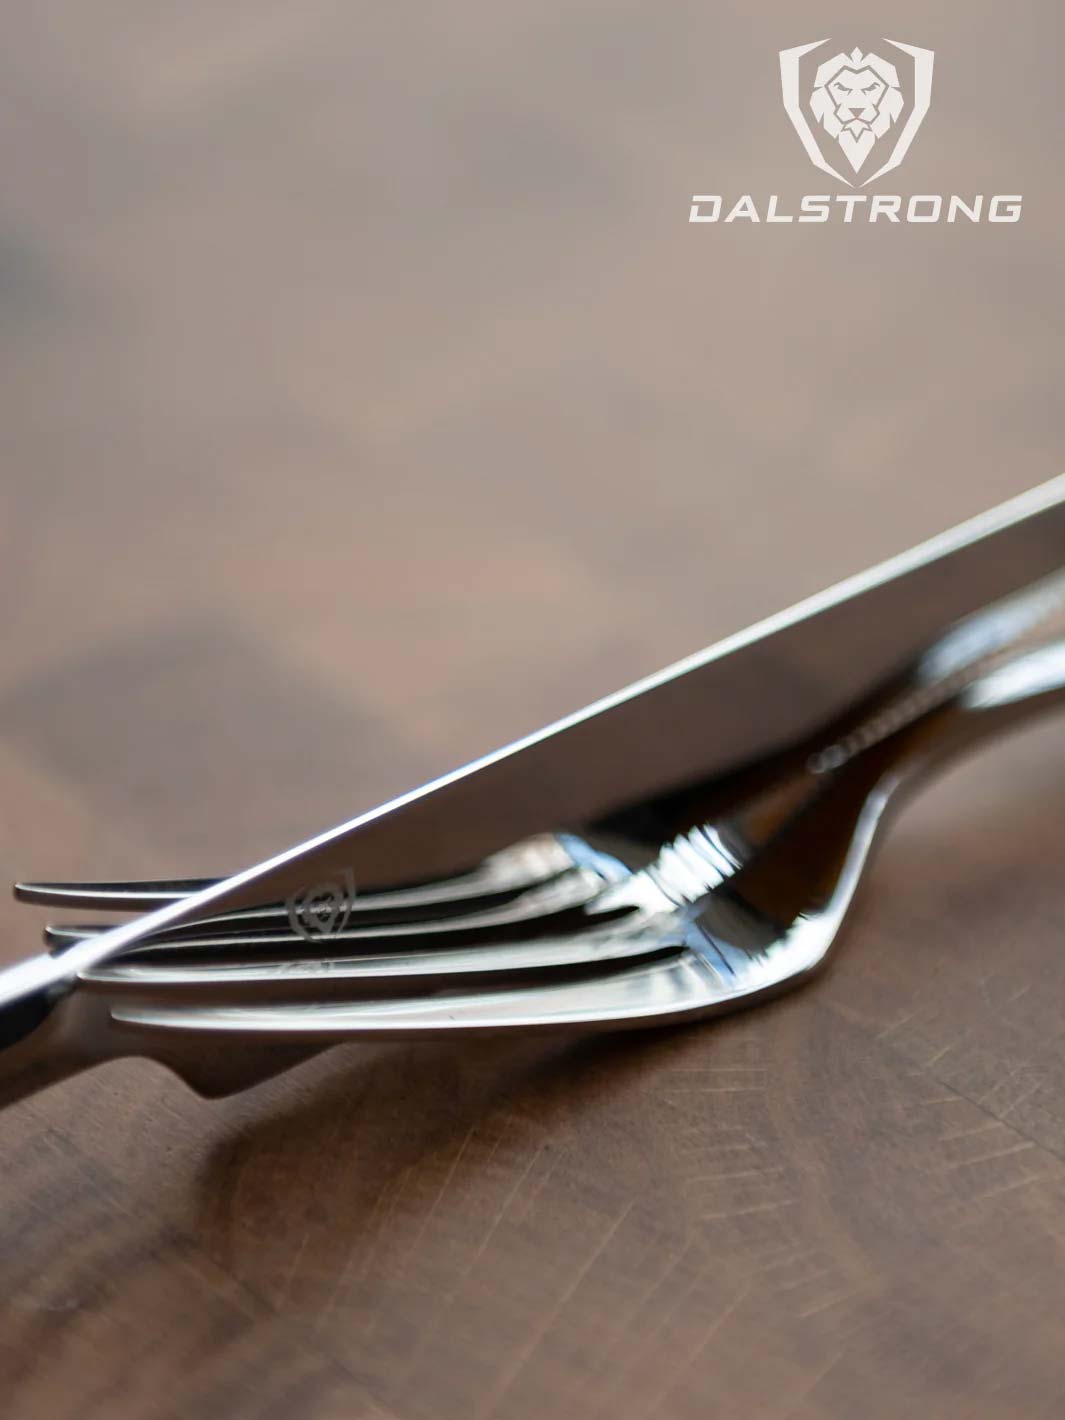 Dalstrong 20 piece flatware cutlery set silver stainless steel service for 4 on top of a cutting board.